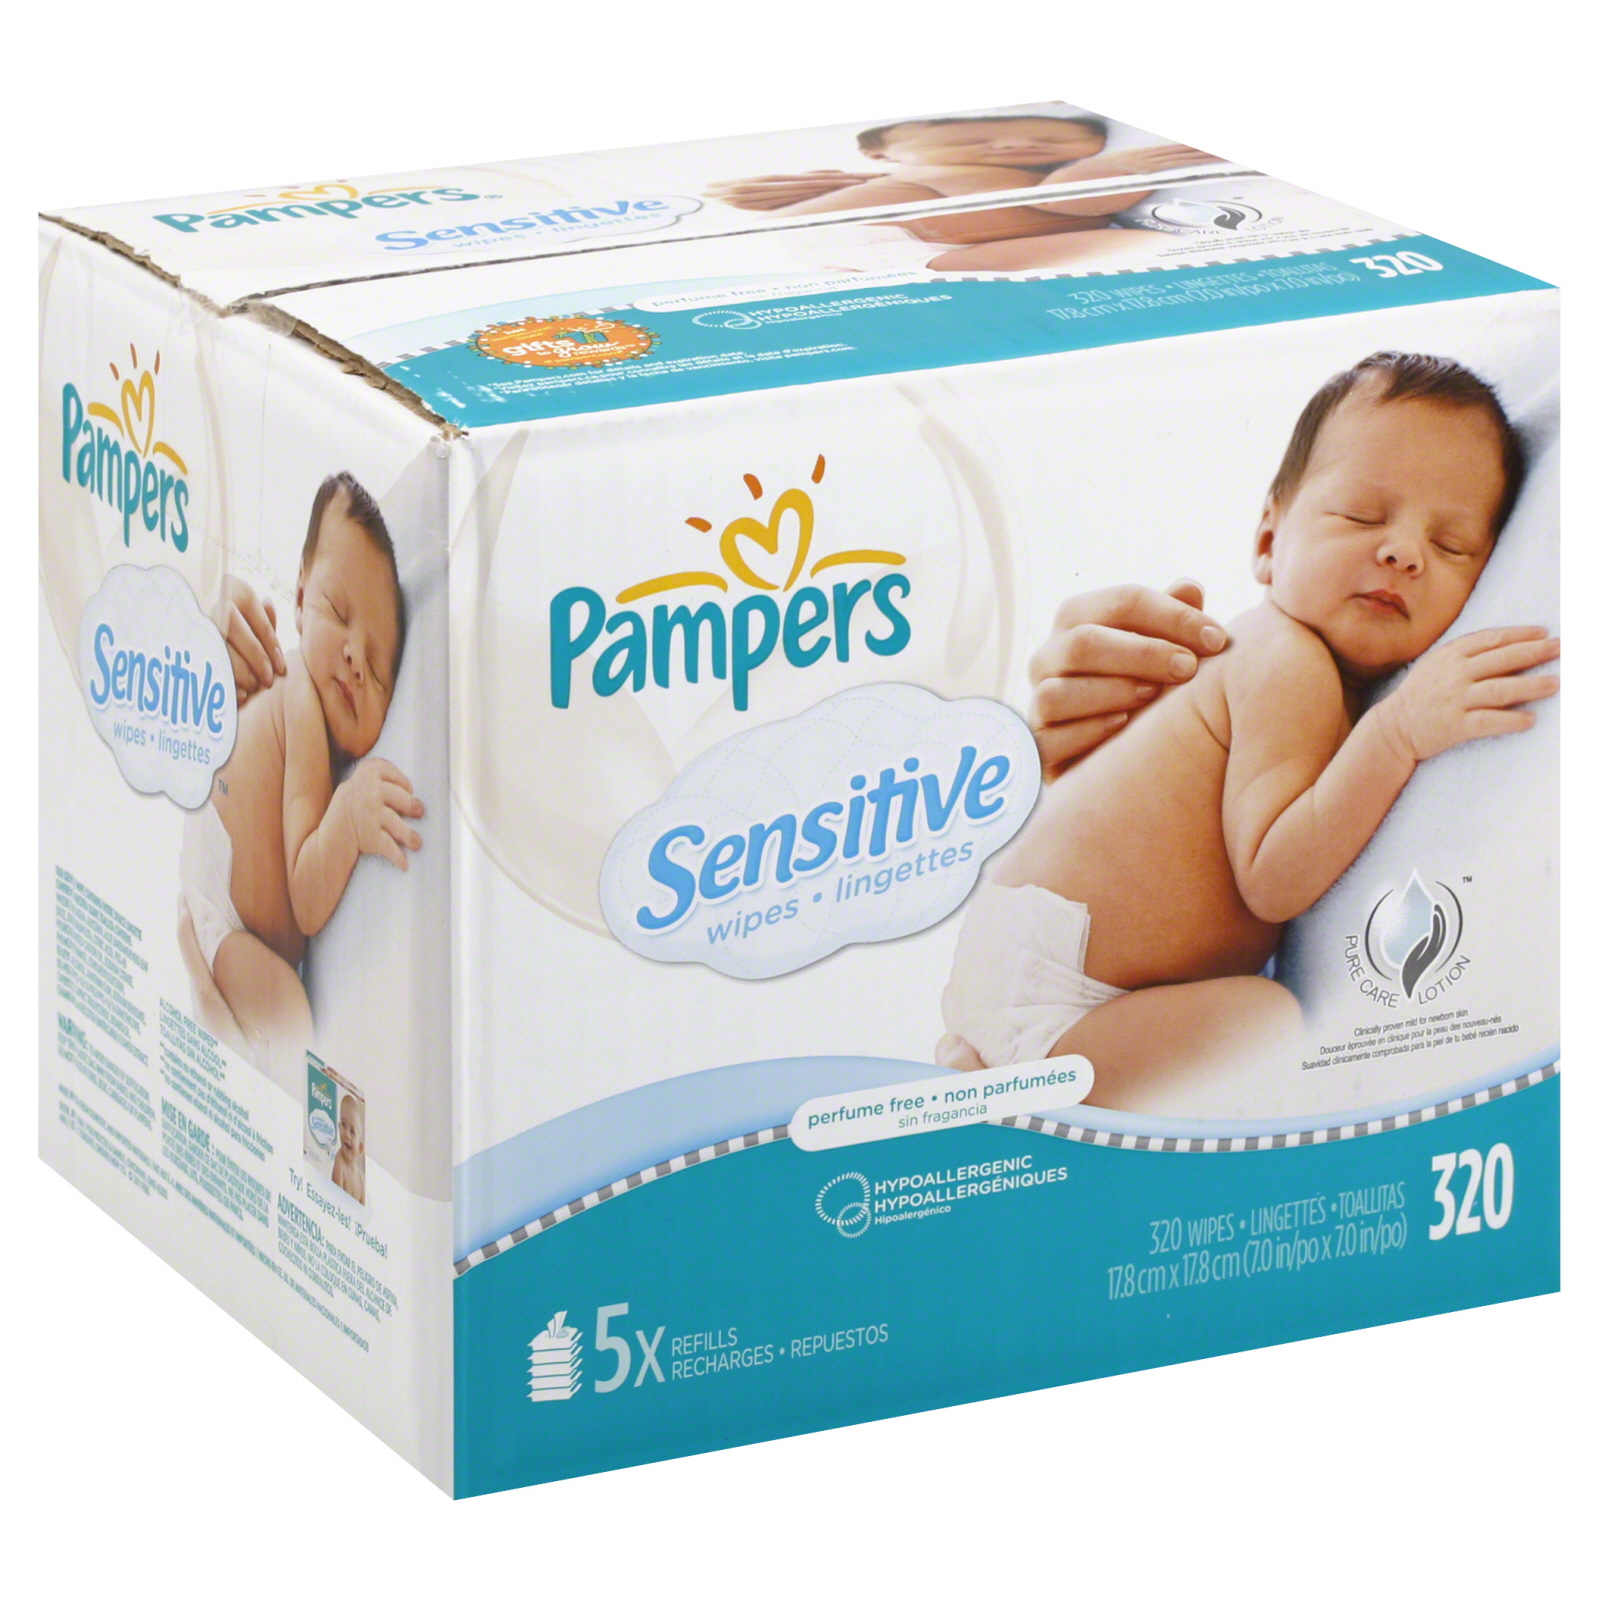 Pampers Baby Wipes Sensitive 5X Refill 320 Count Baby Wipes